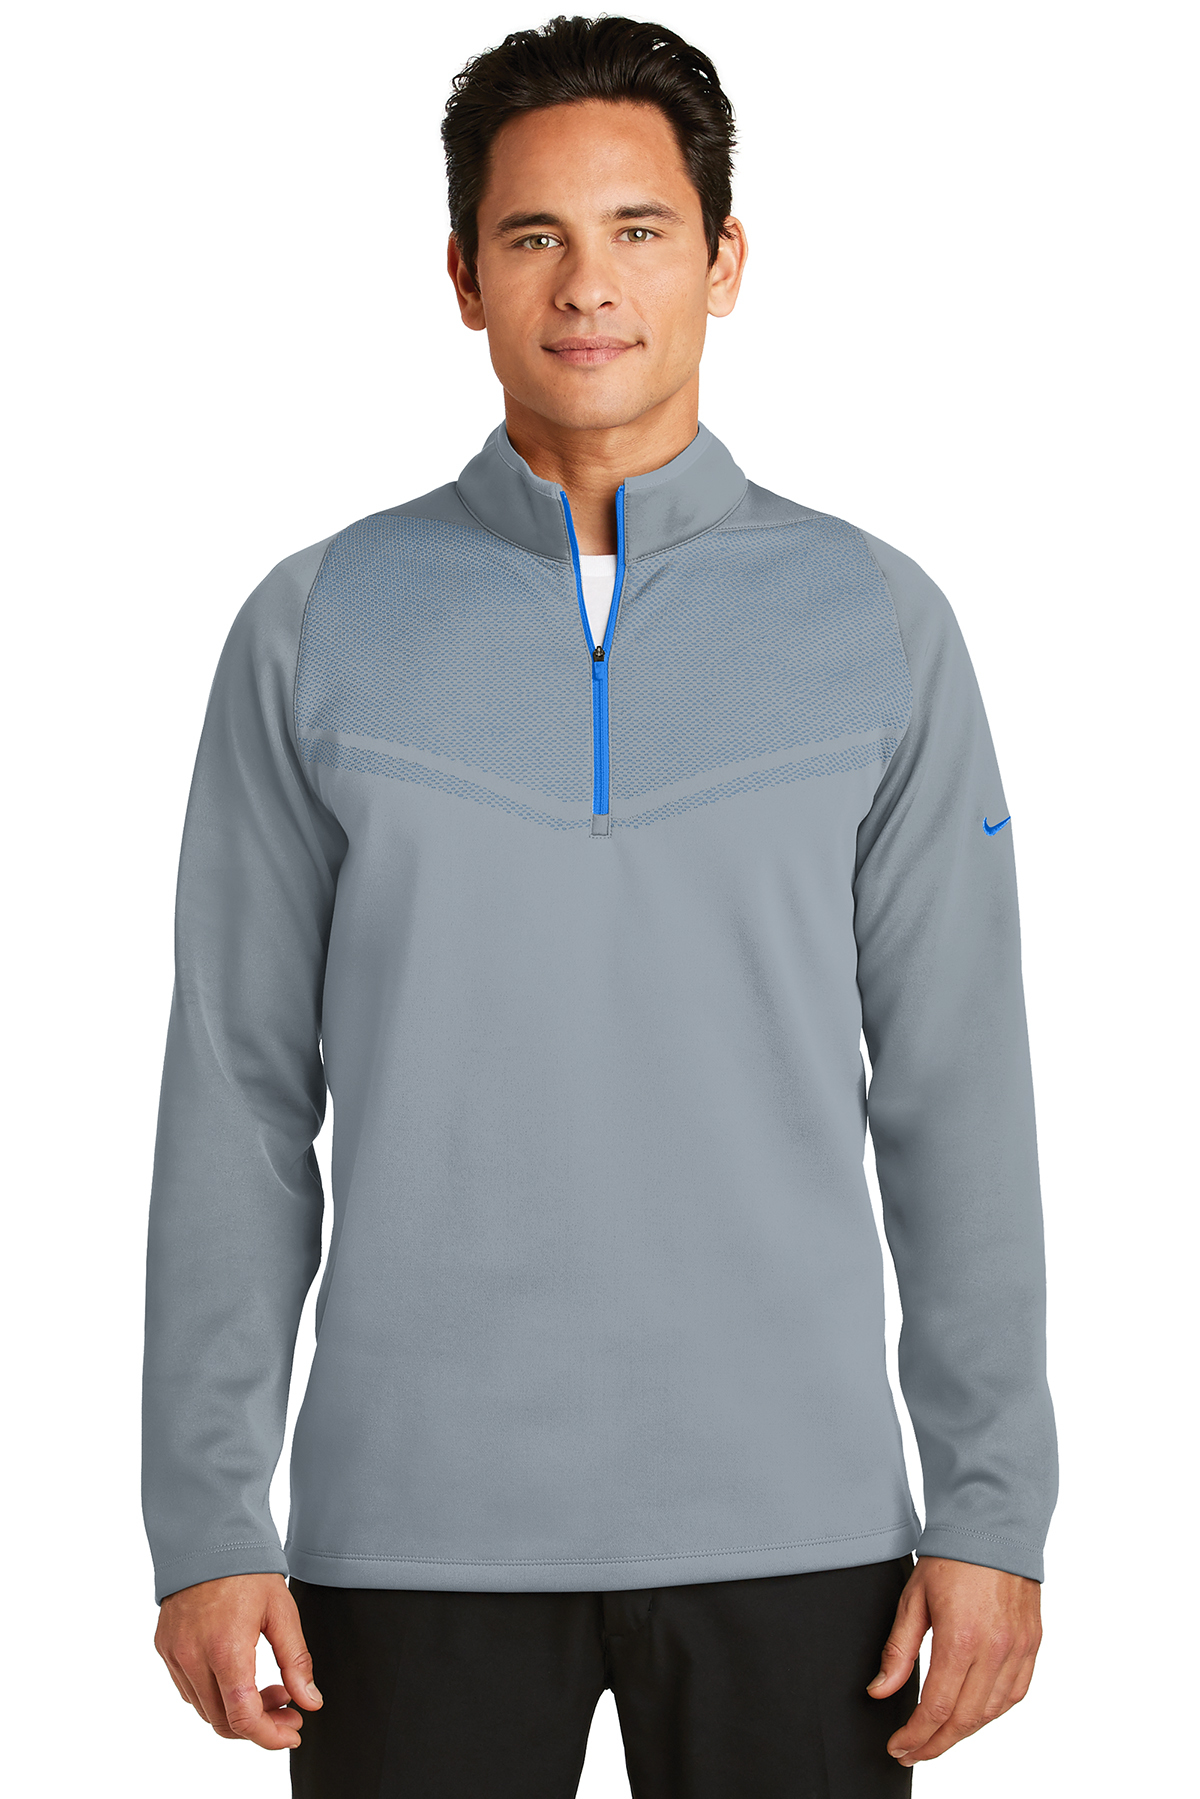 nike therma fit long sleeve